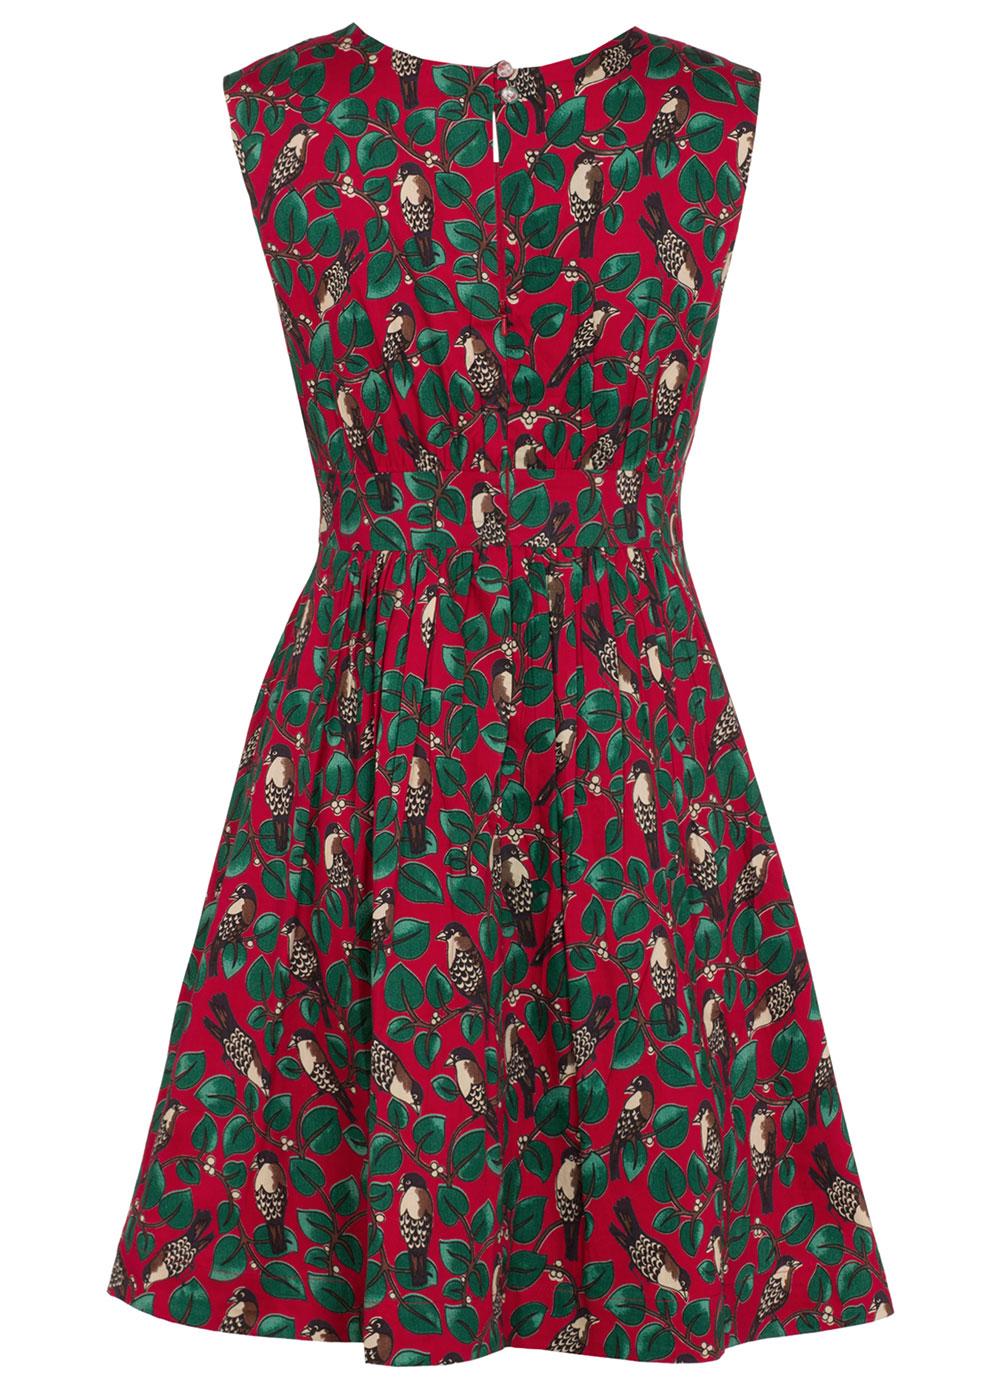 EMILY AND FIN Lucy Red Winter Bird Retro 60s A-Line Mod Dress